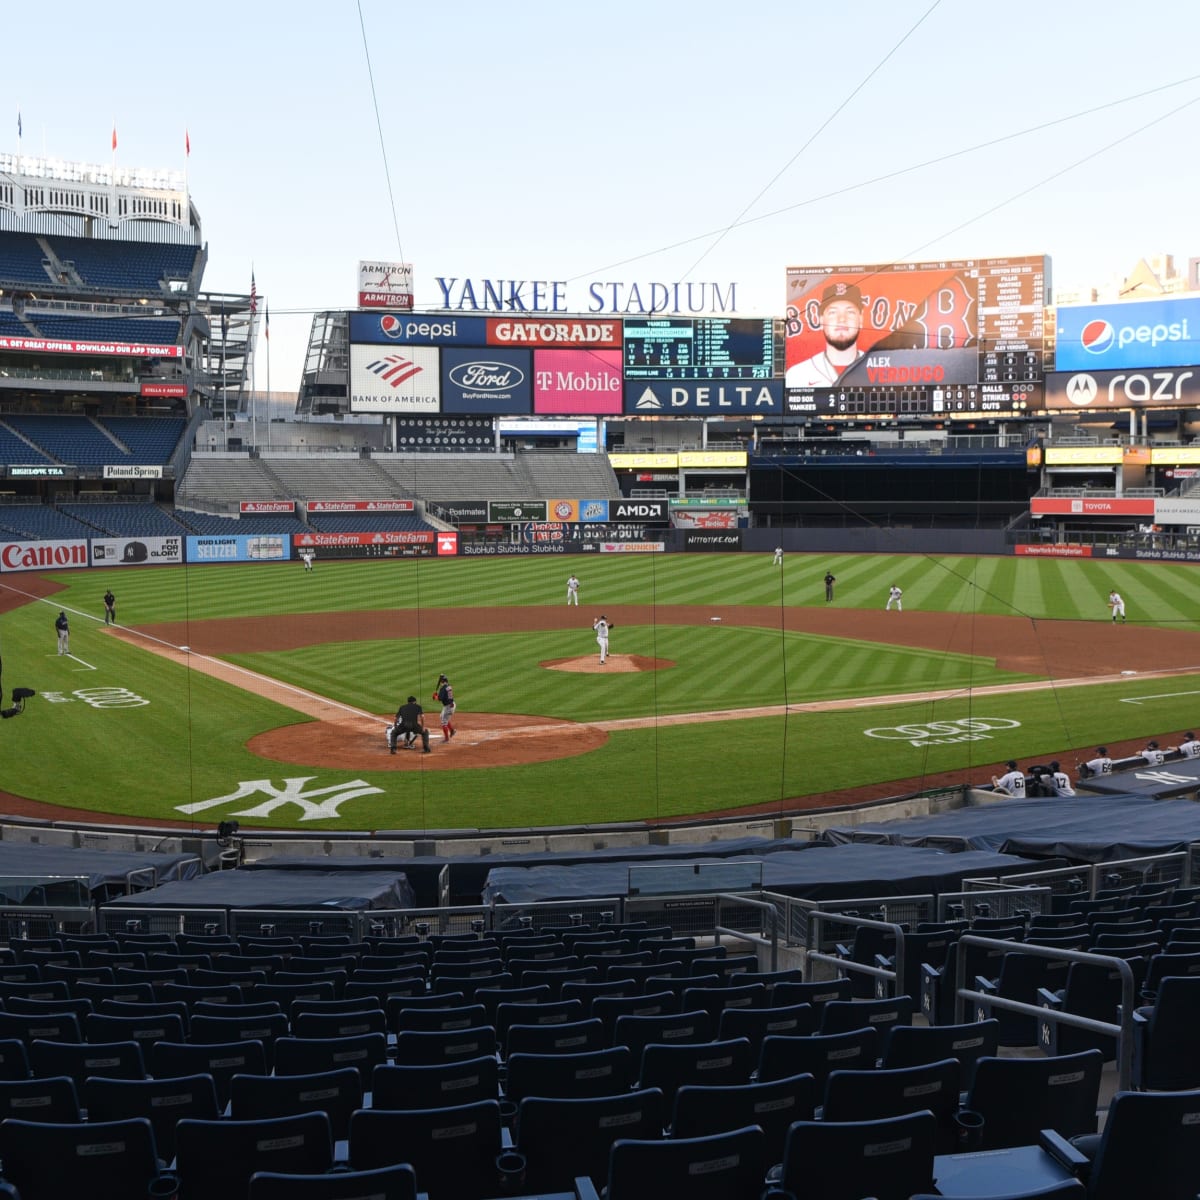 With help from Lou Gehrig, MLB launches into NFT space